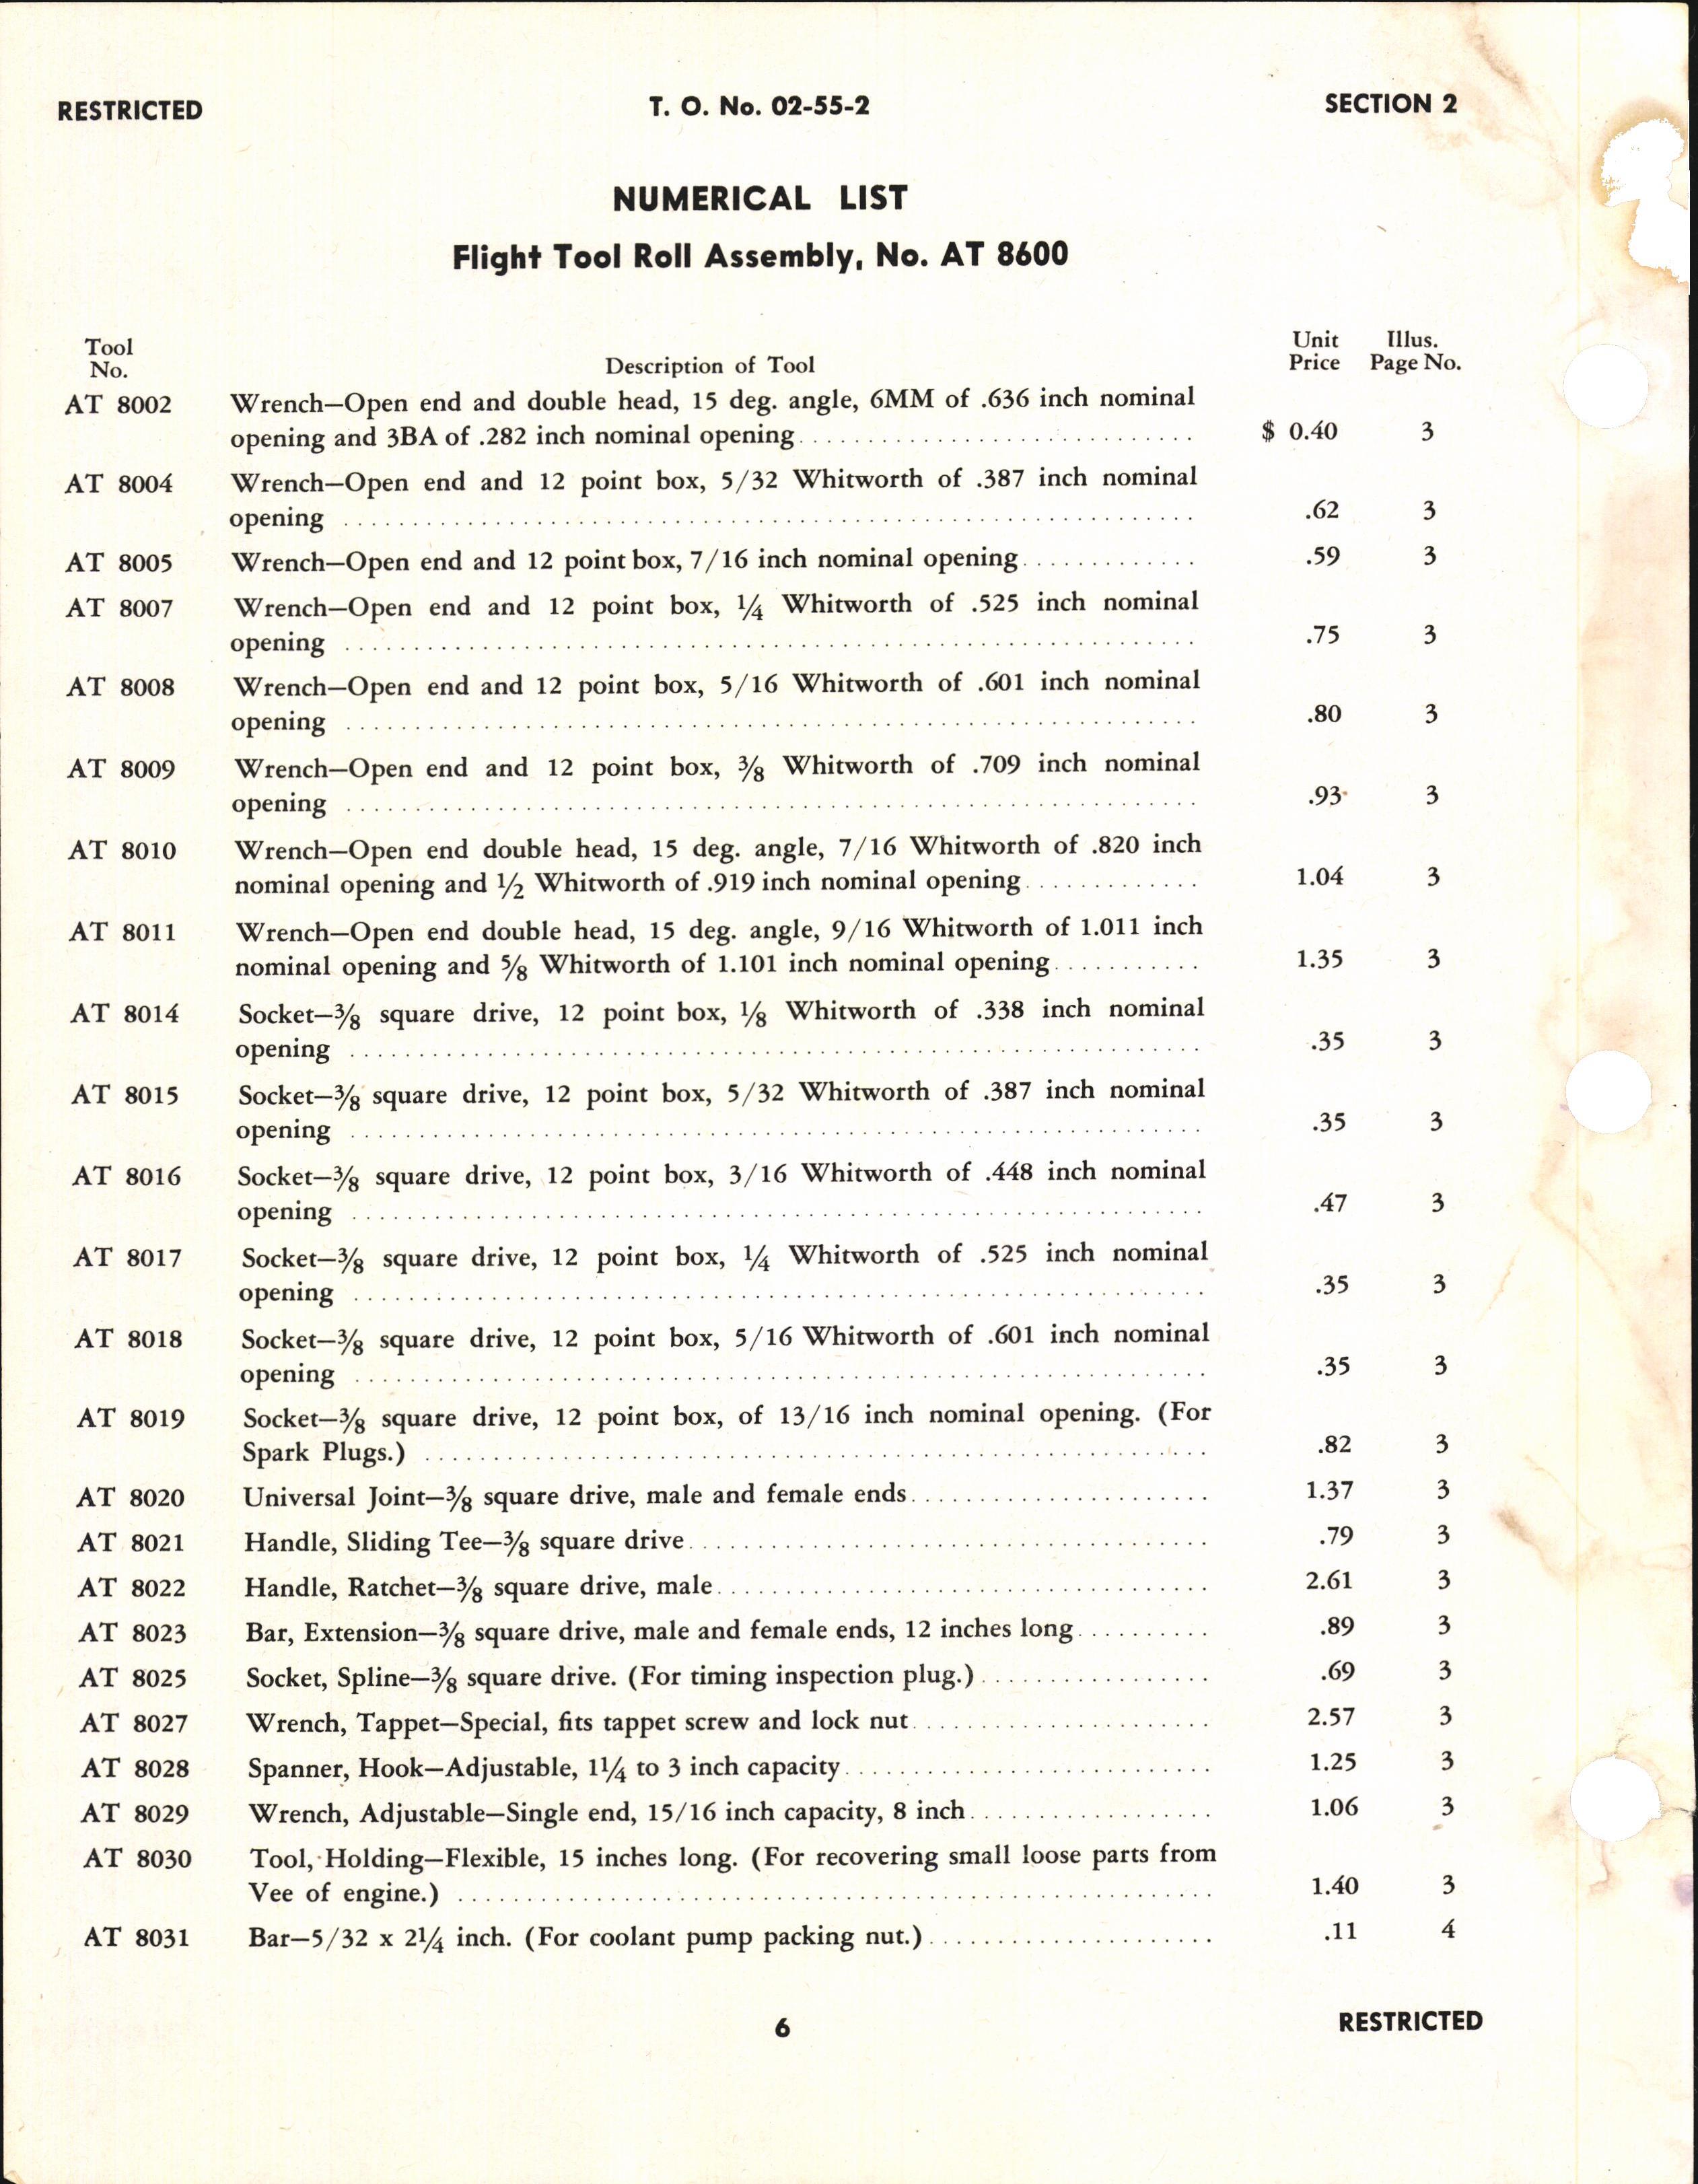 Sample page 8 from AirCorps Library document: Service Tools Catalog for Rolls-Royce Aircraft Engines